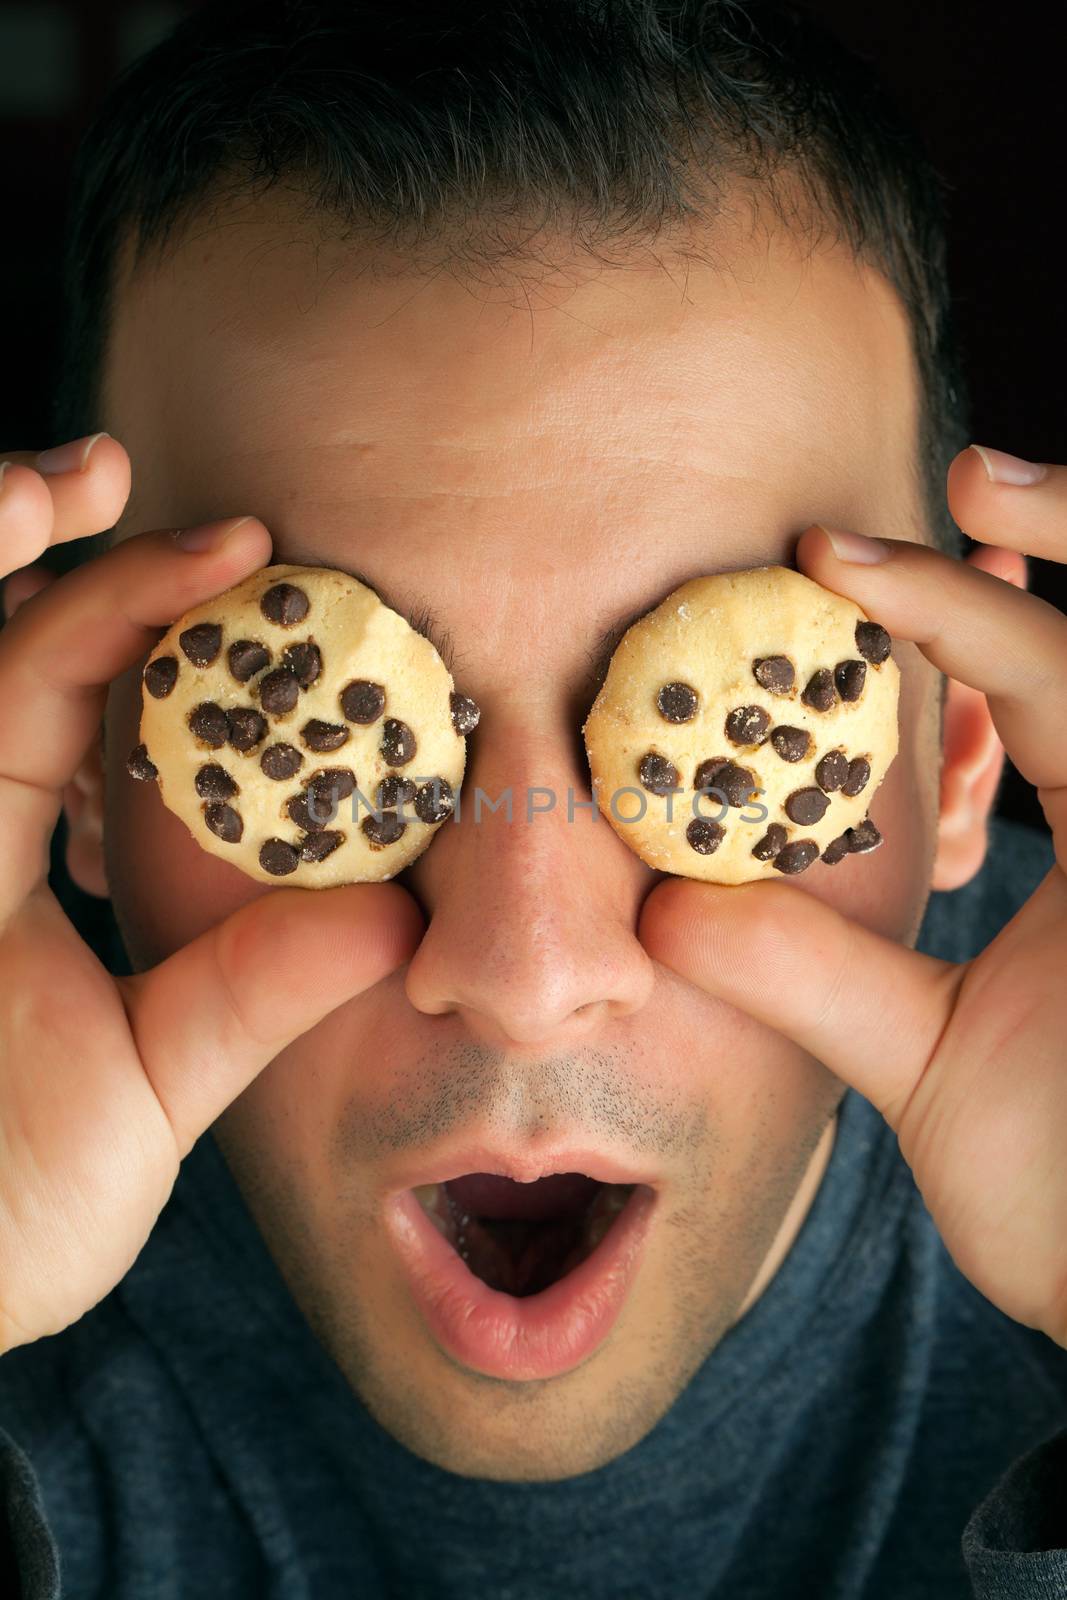 Crazy Cookie Eyed Man by graficallyminded